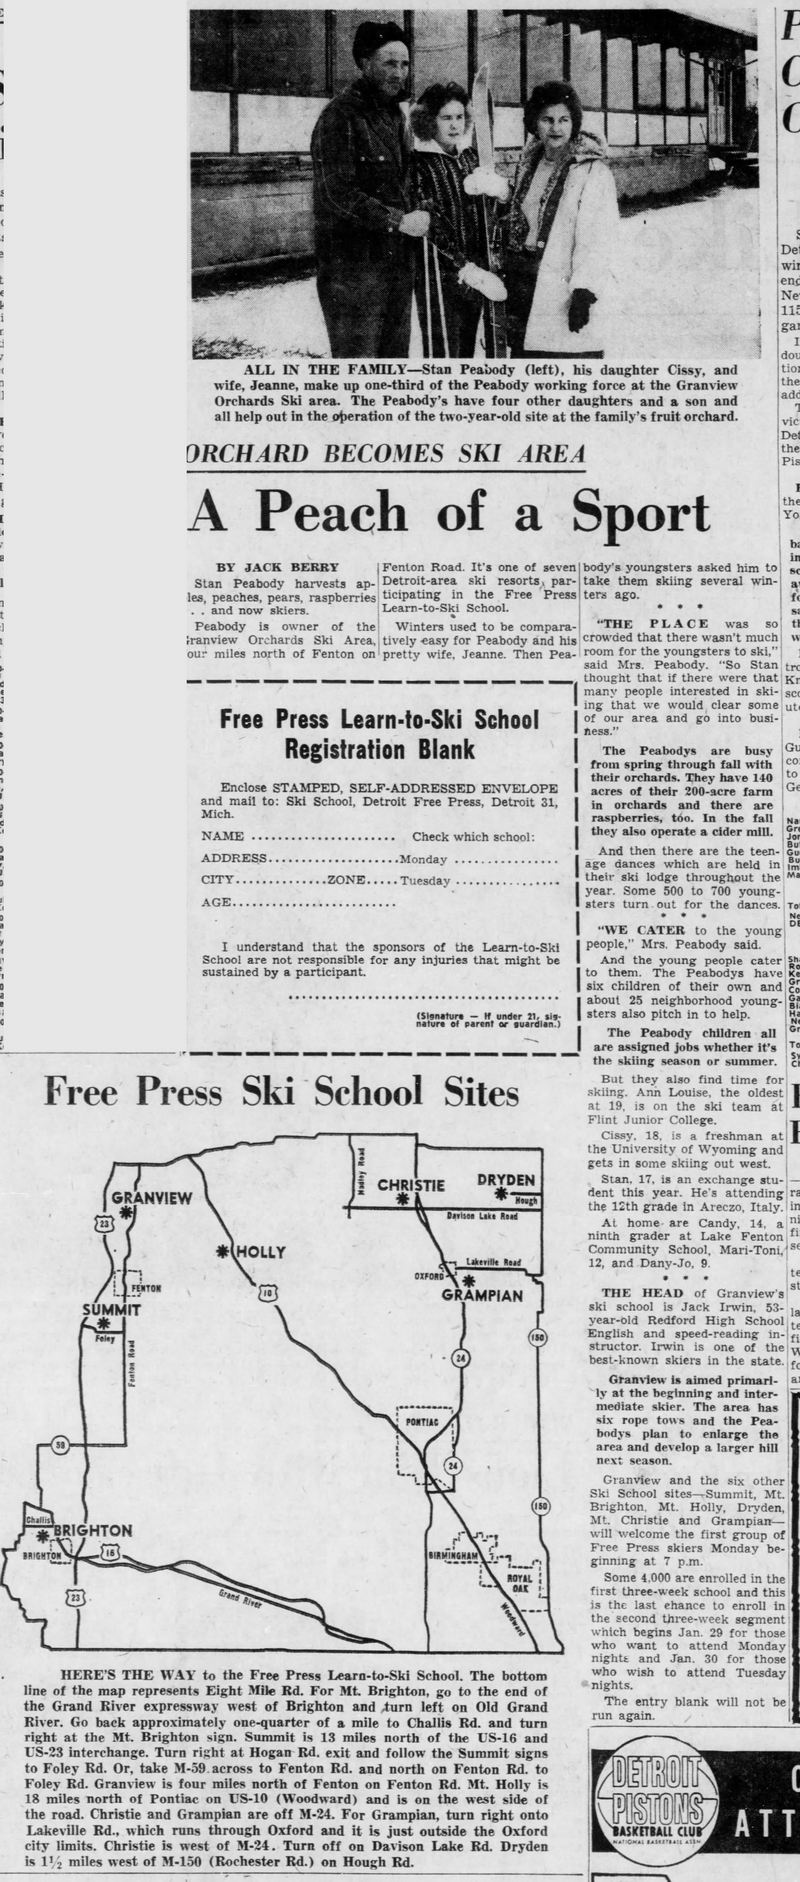 Granview Orchards Ski Area - Jan 7 1962 Article With Family